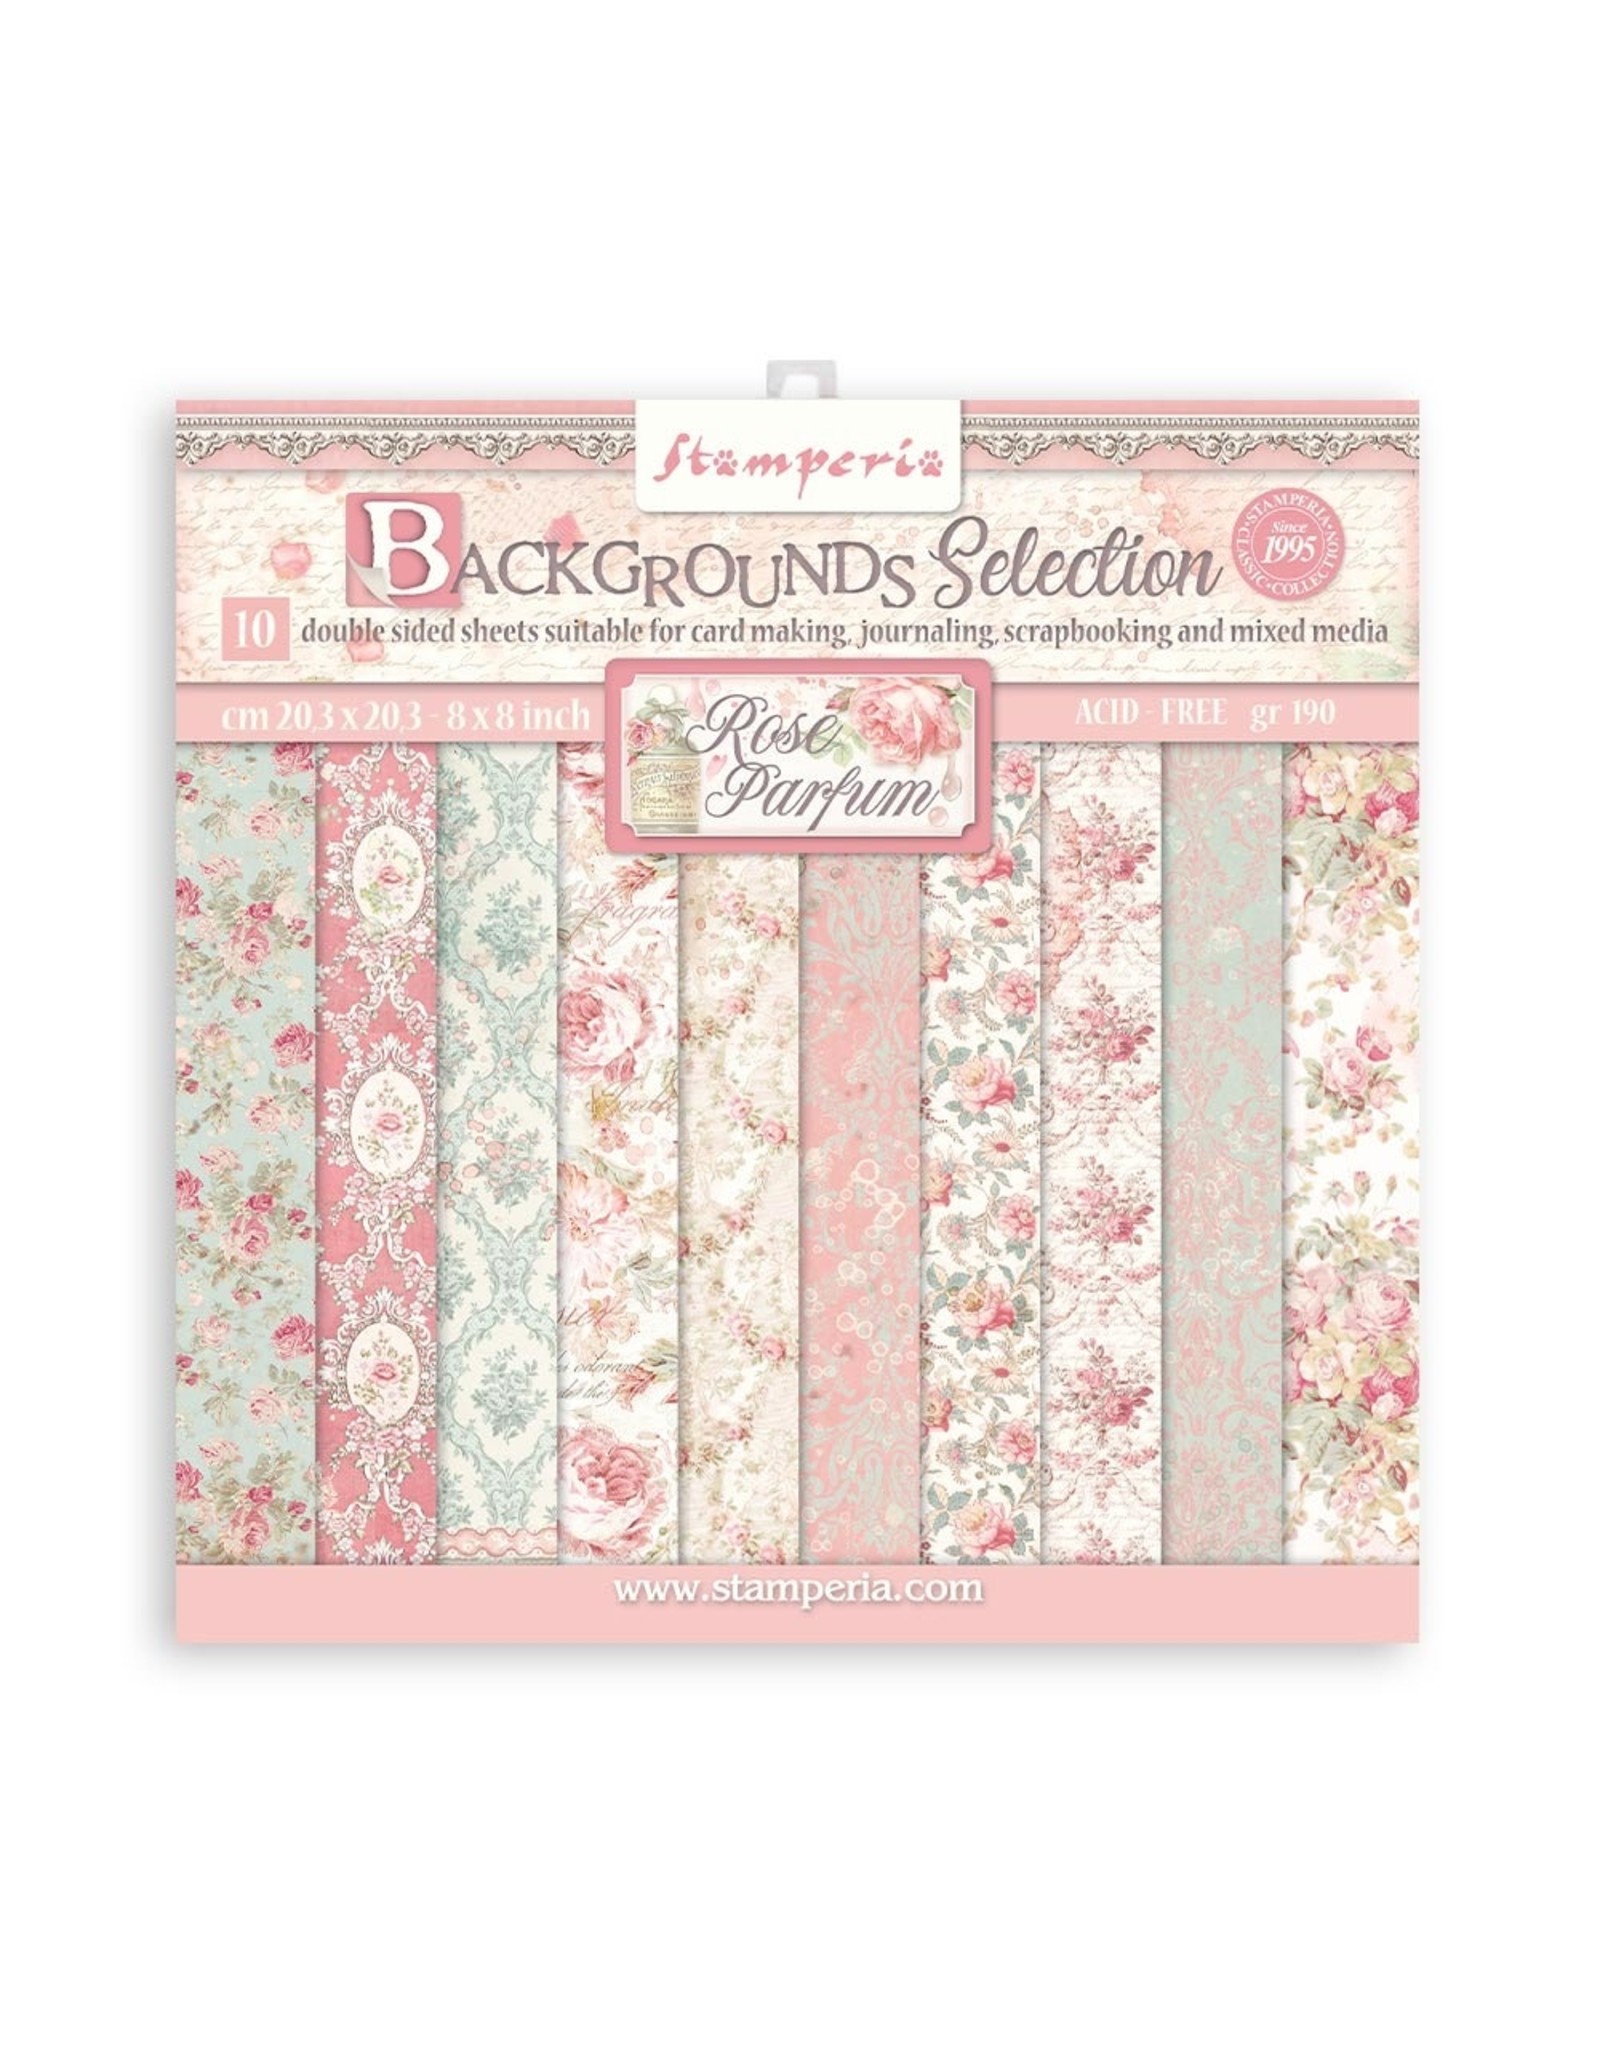 STAMPERIA STAMPERIA ROSE PARFUM BACKGROUNDS SELECTION 8x8 PAPER PACK 10 SHEETS